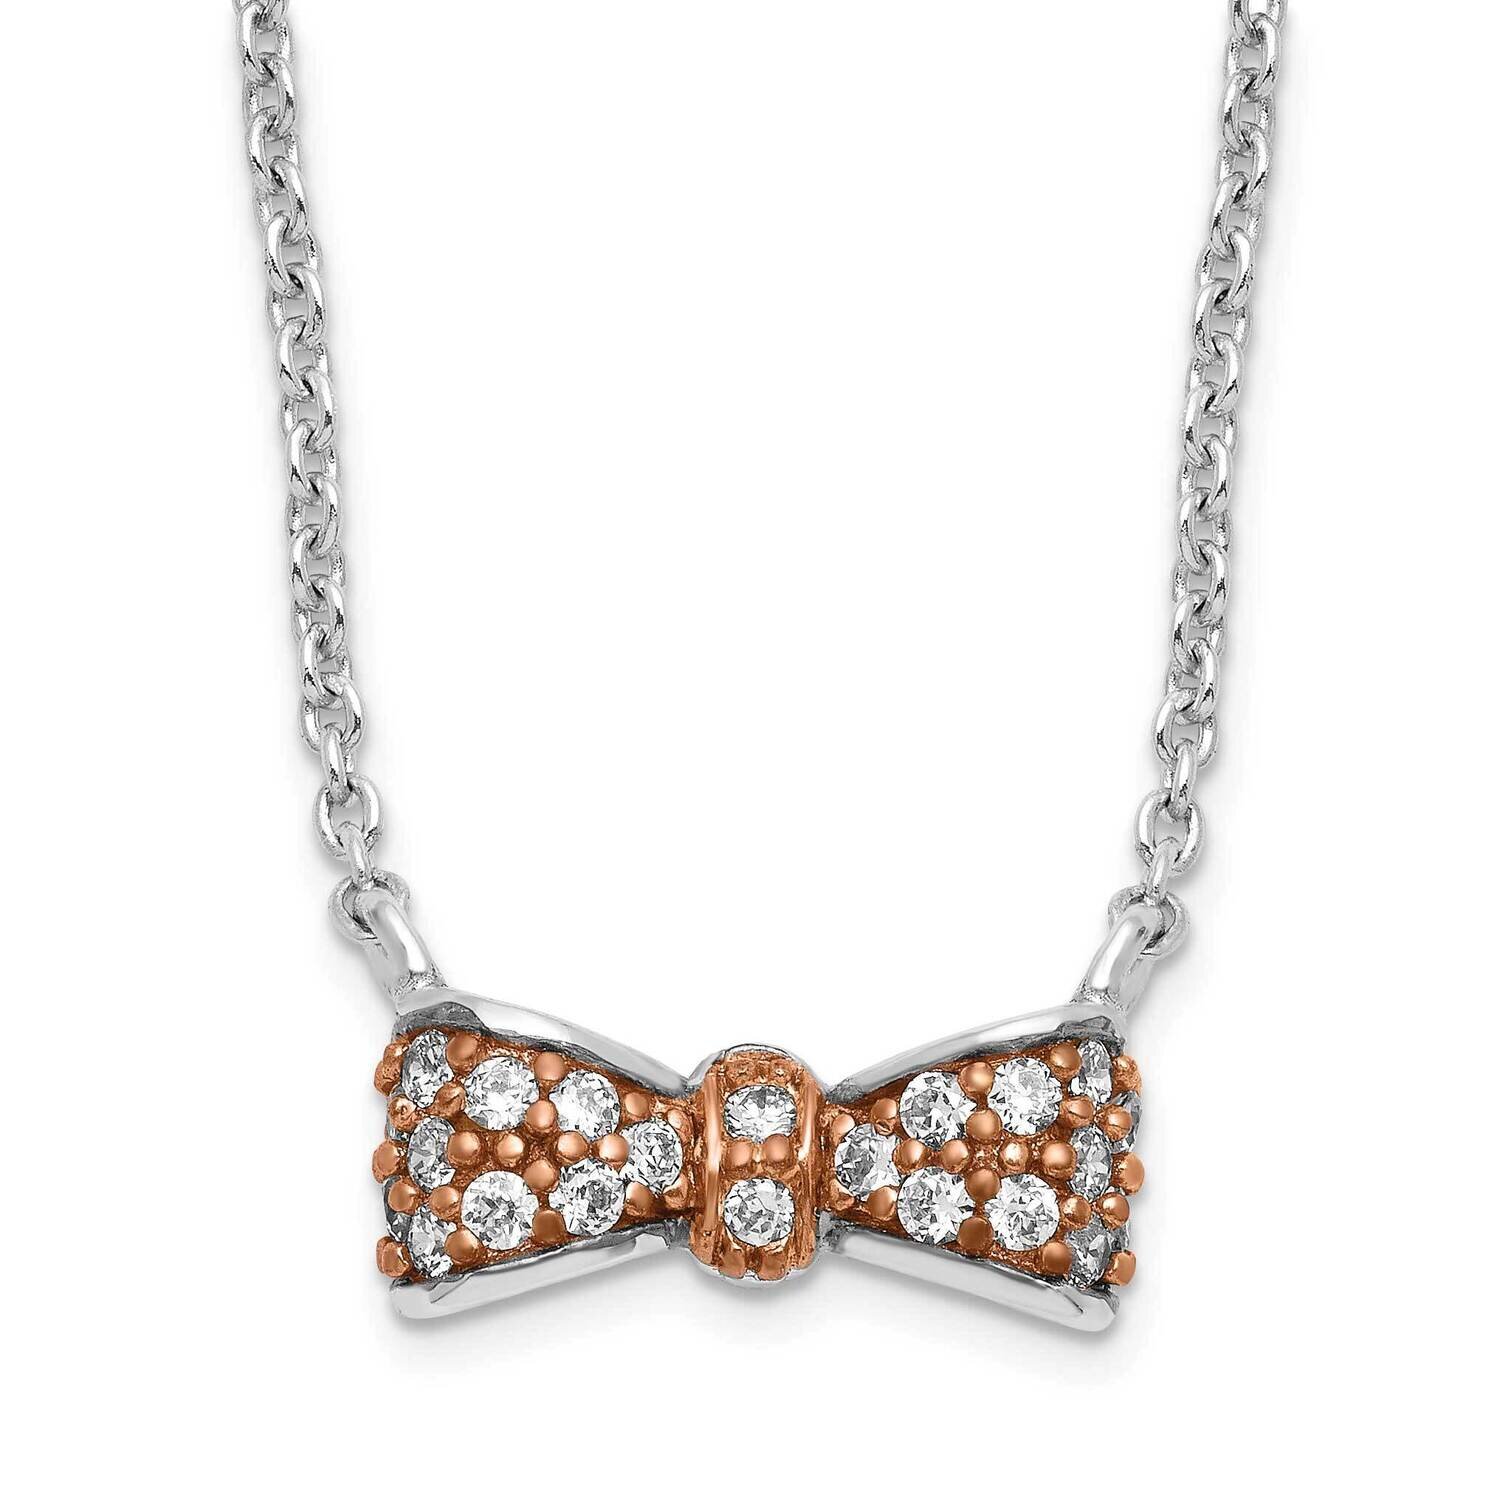 Cheryl M Rose Gold-Plated & CZ Diamond Bow Necklace Sterling Silver QCM942-18